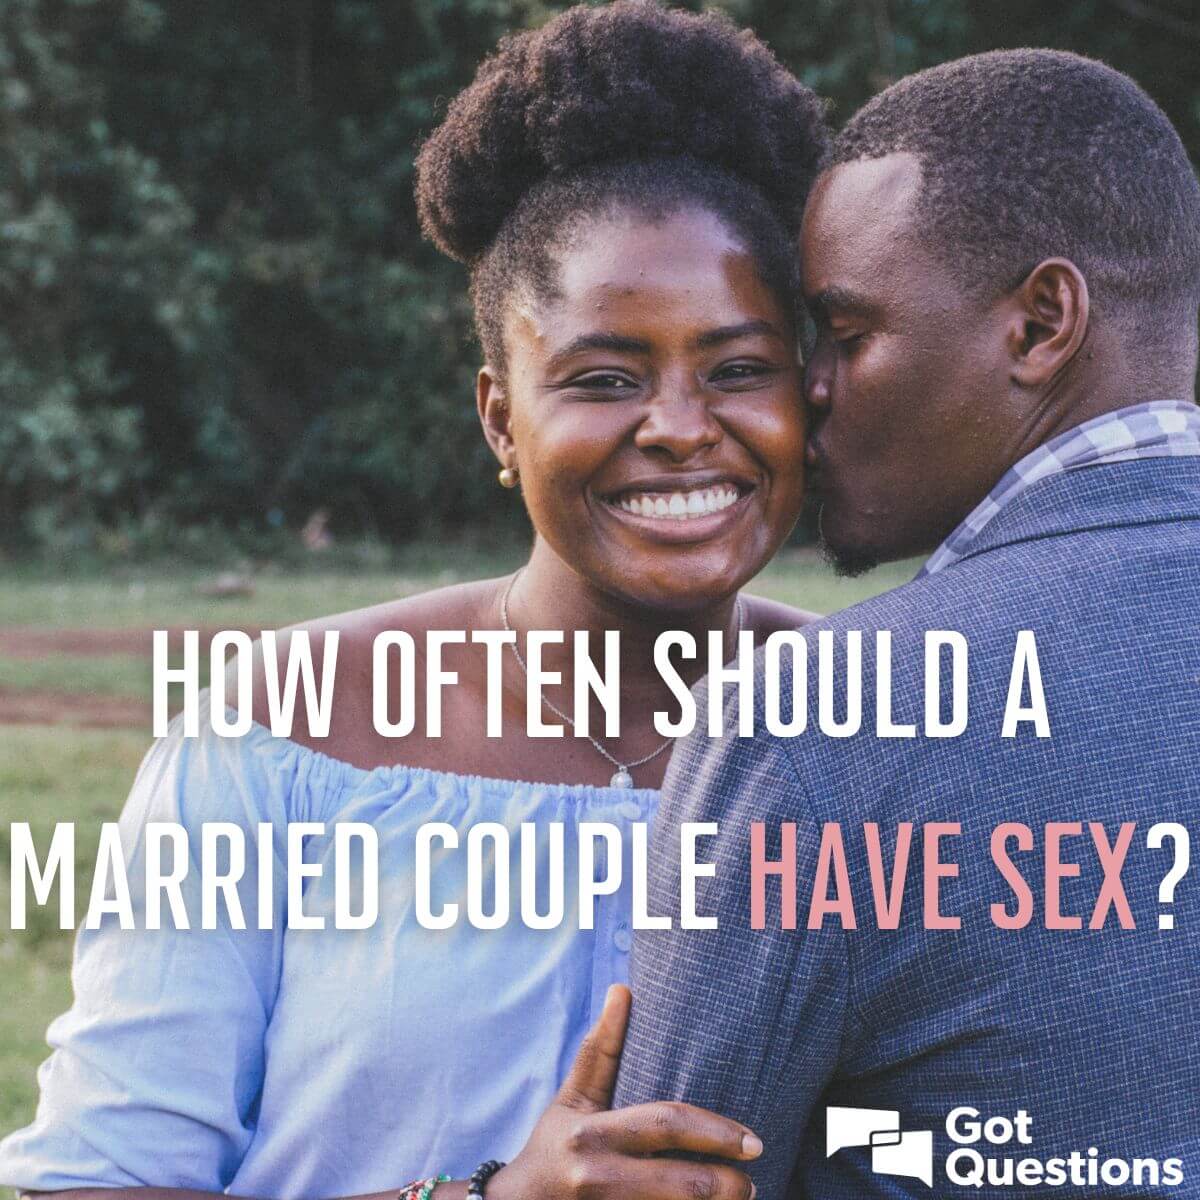 How often should a married couple have sex? GotQuestions photo